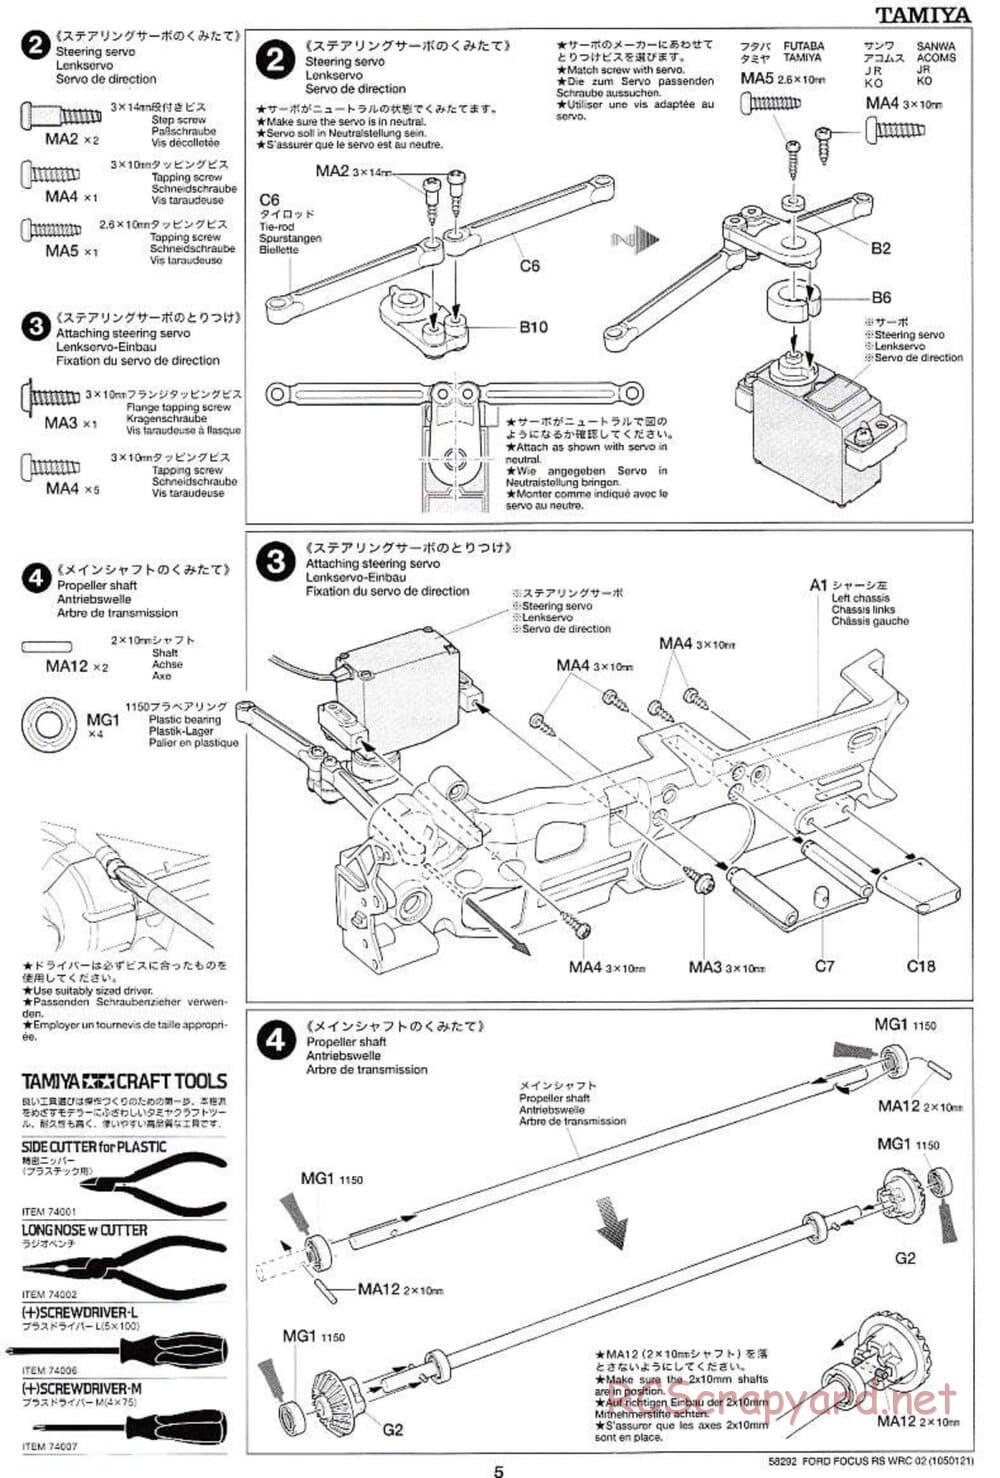 Tamiya - Ford Focus RS WRC 02 - TL-01 Chassis - Manual - Page 5